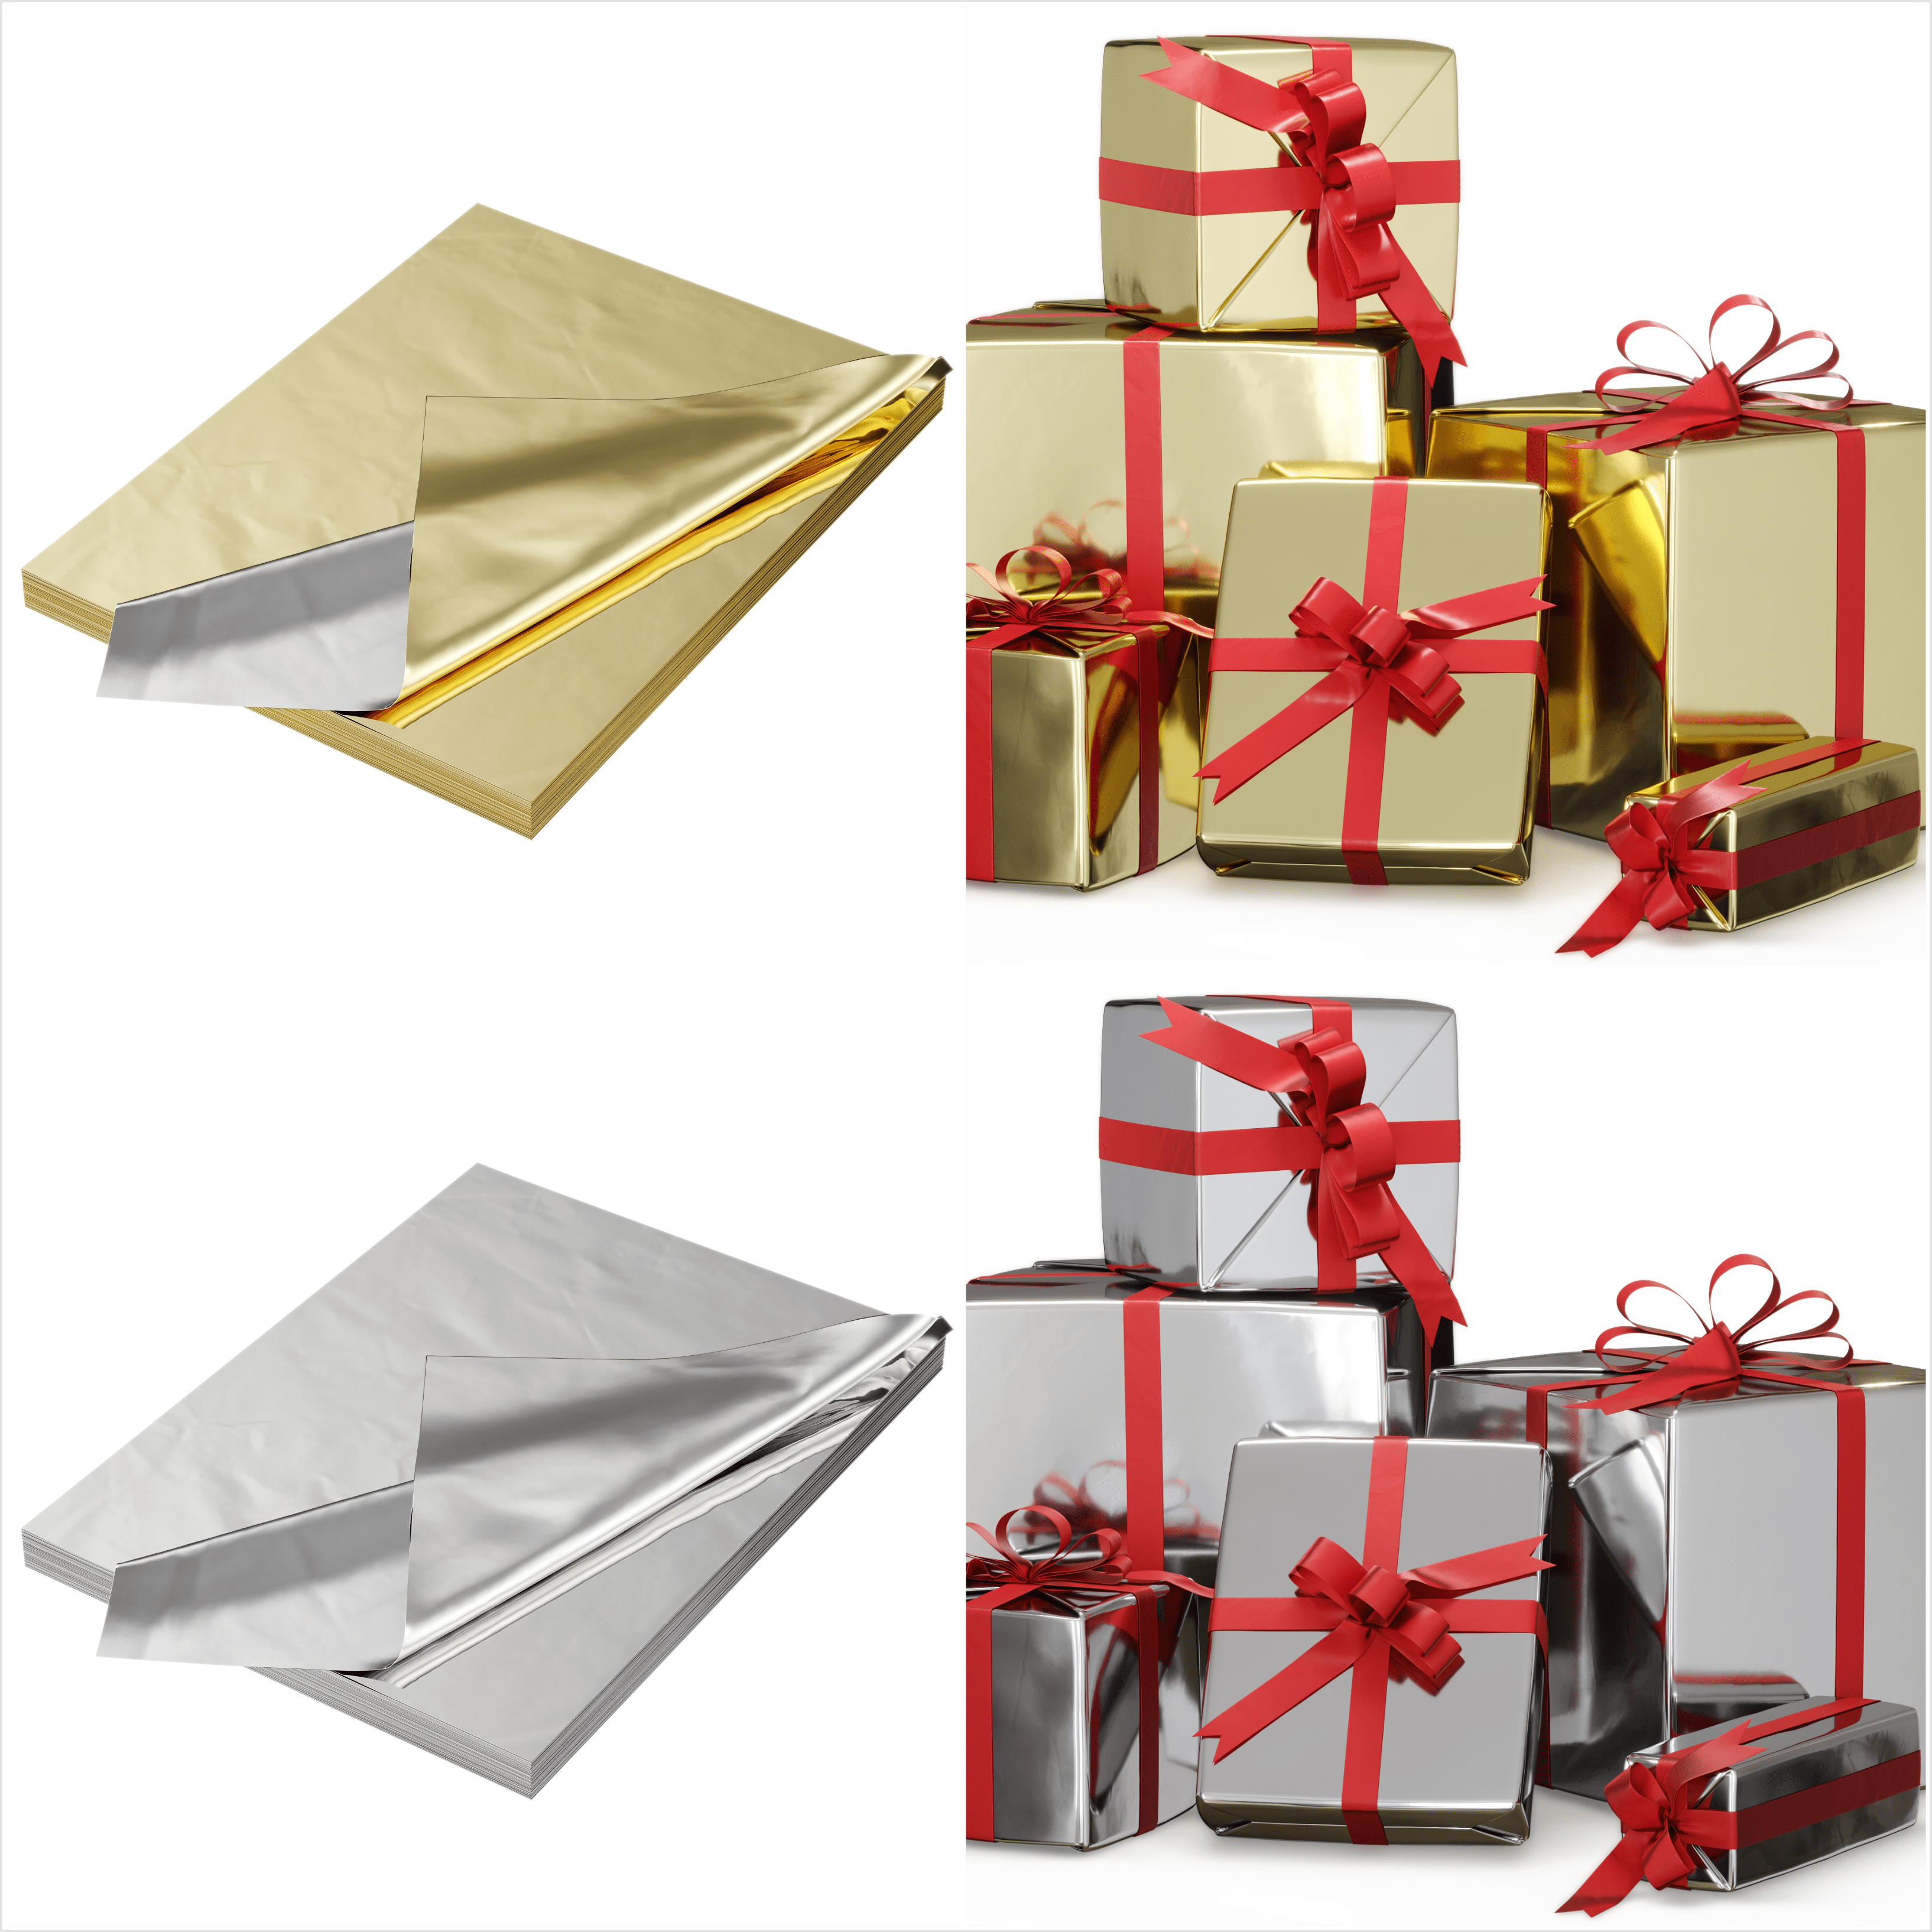 100 Ct Mylar Foil Sheets For Gift Wrapping Gift Basket Filler - 20 x 30 in  by Crown Display - Gold